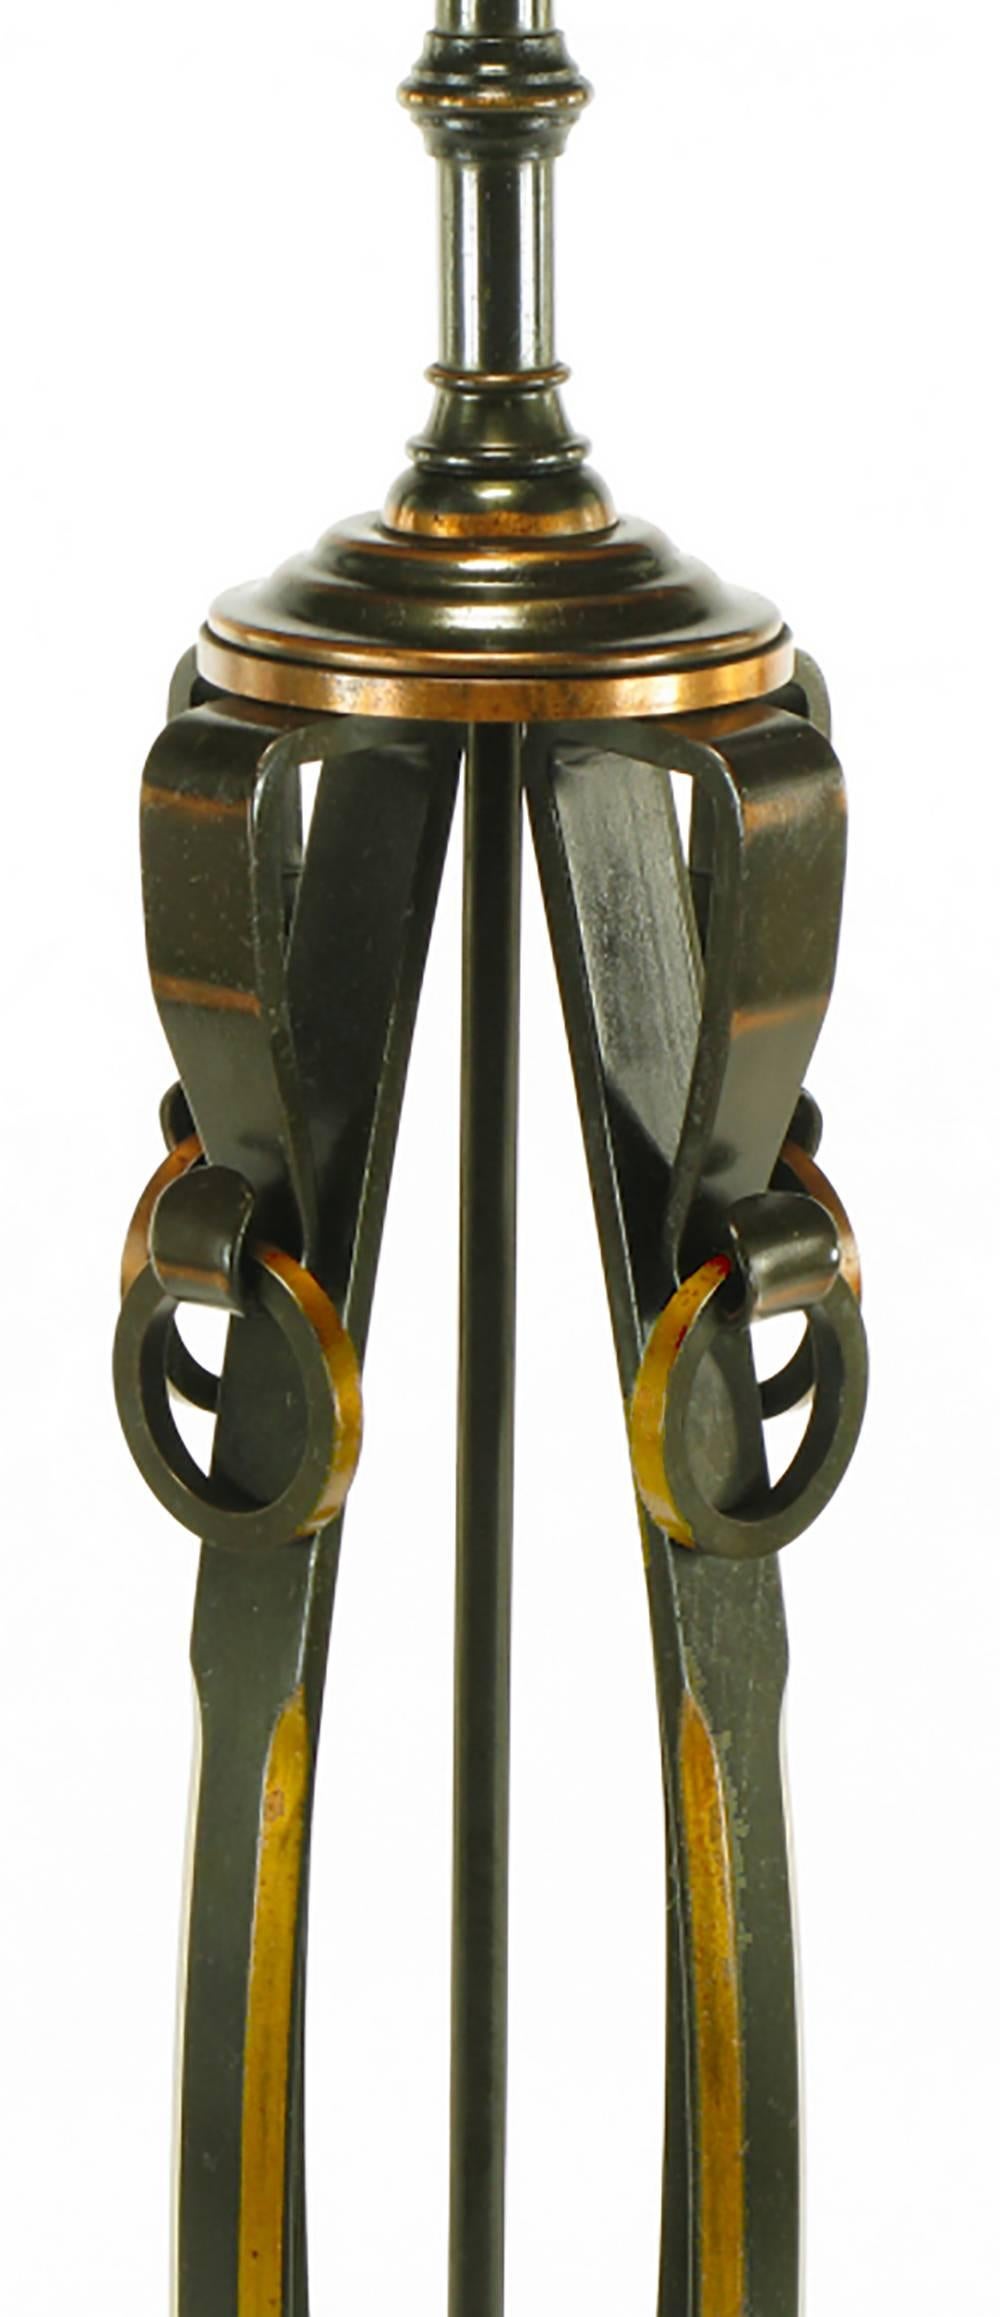 Elegant 1930s Floor Lamp of Copper over Bronze Straps with Drop-Rings In Good Condition For Sale In Chicago, IL